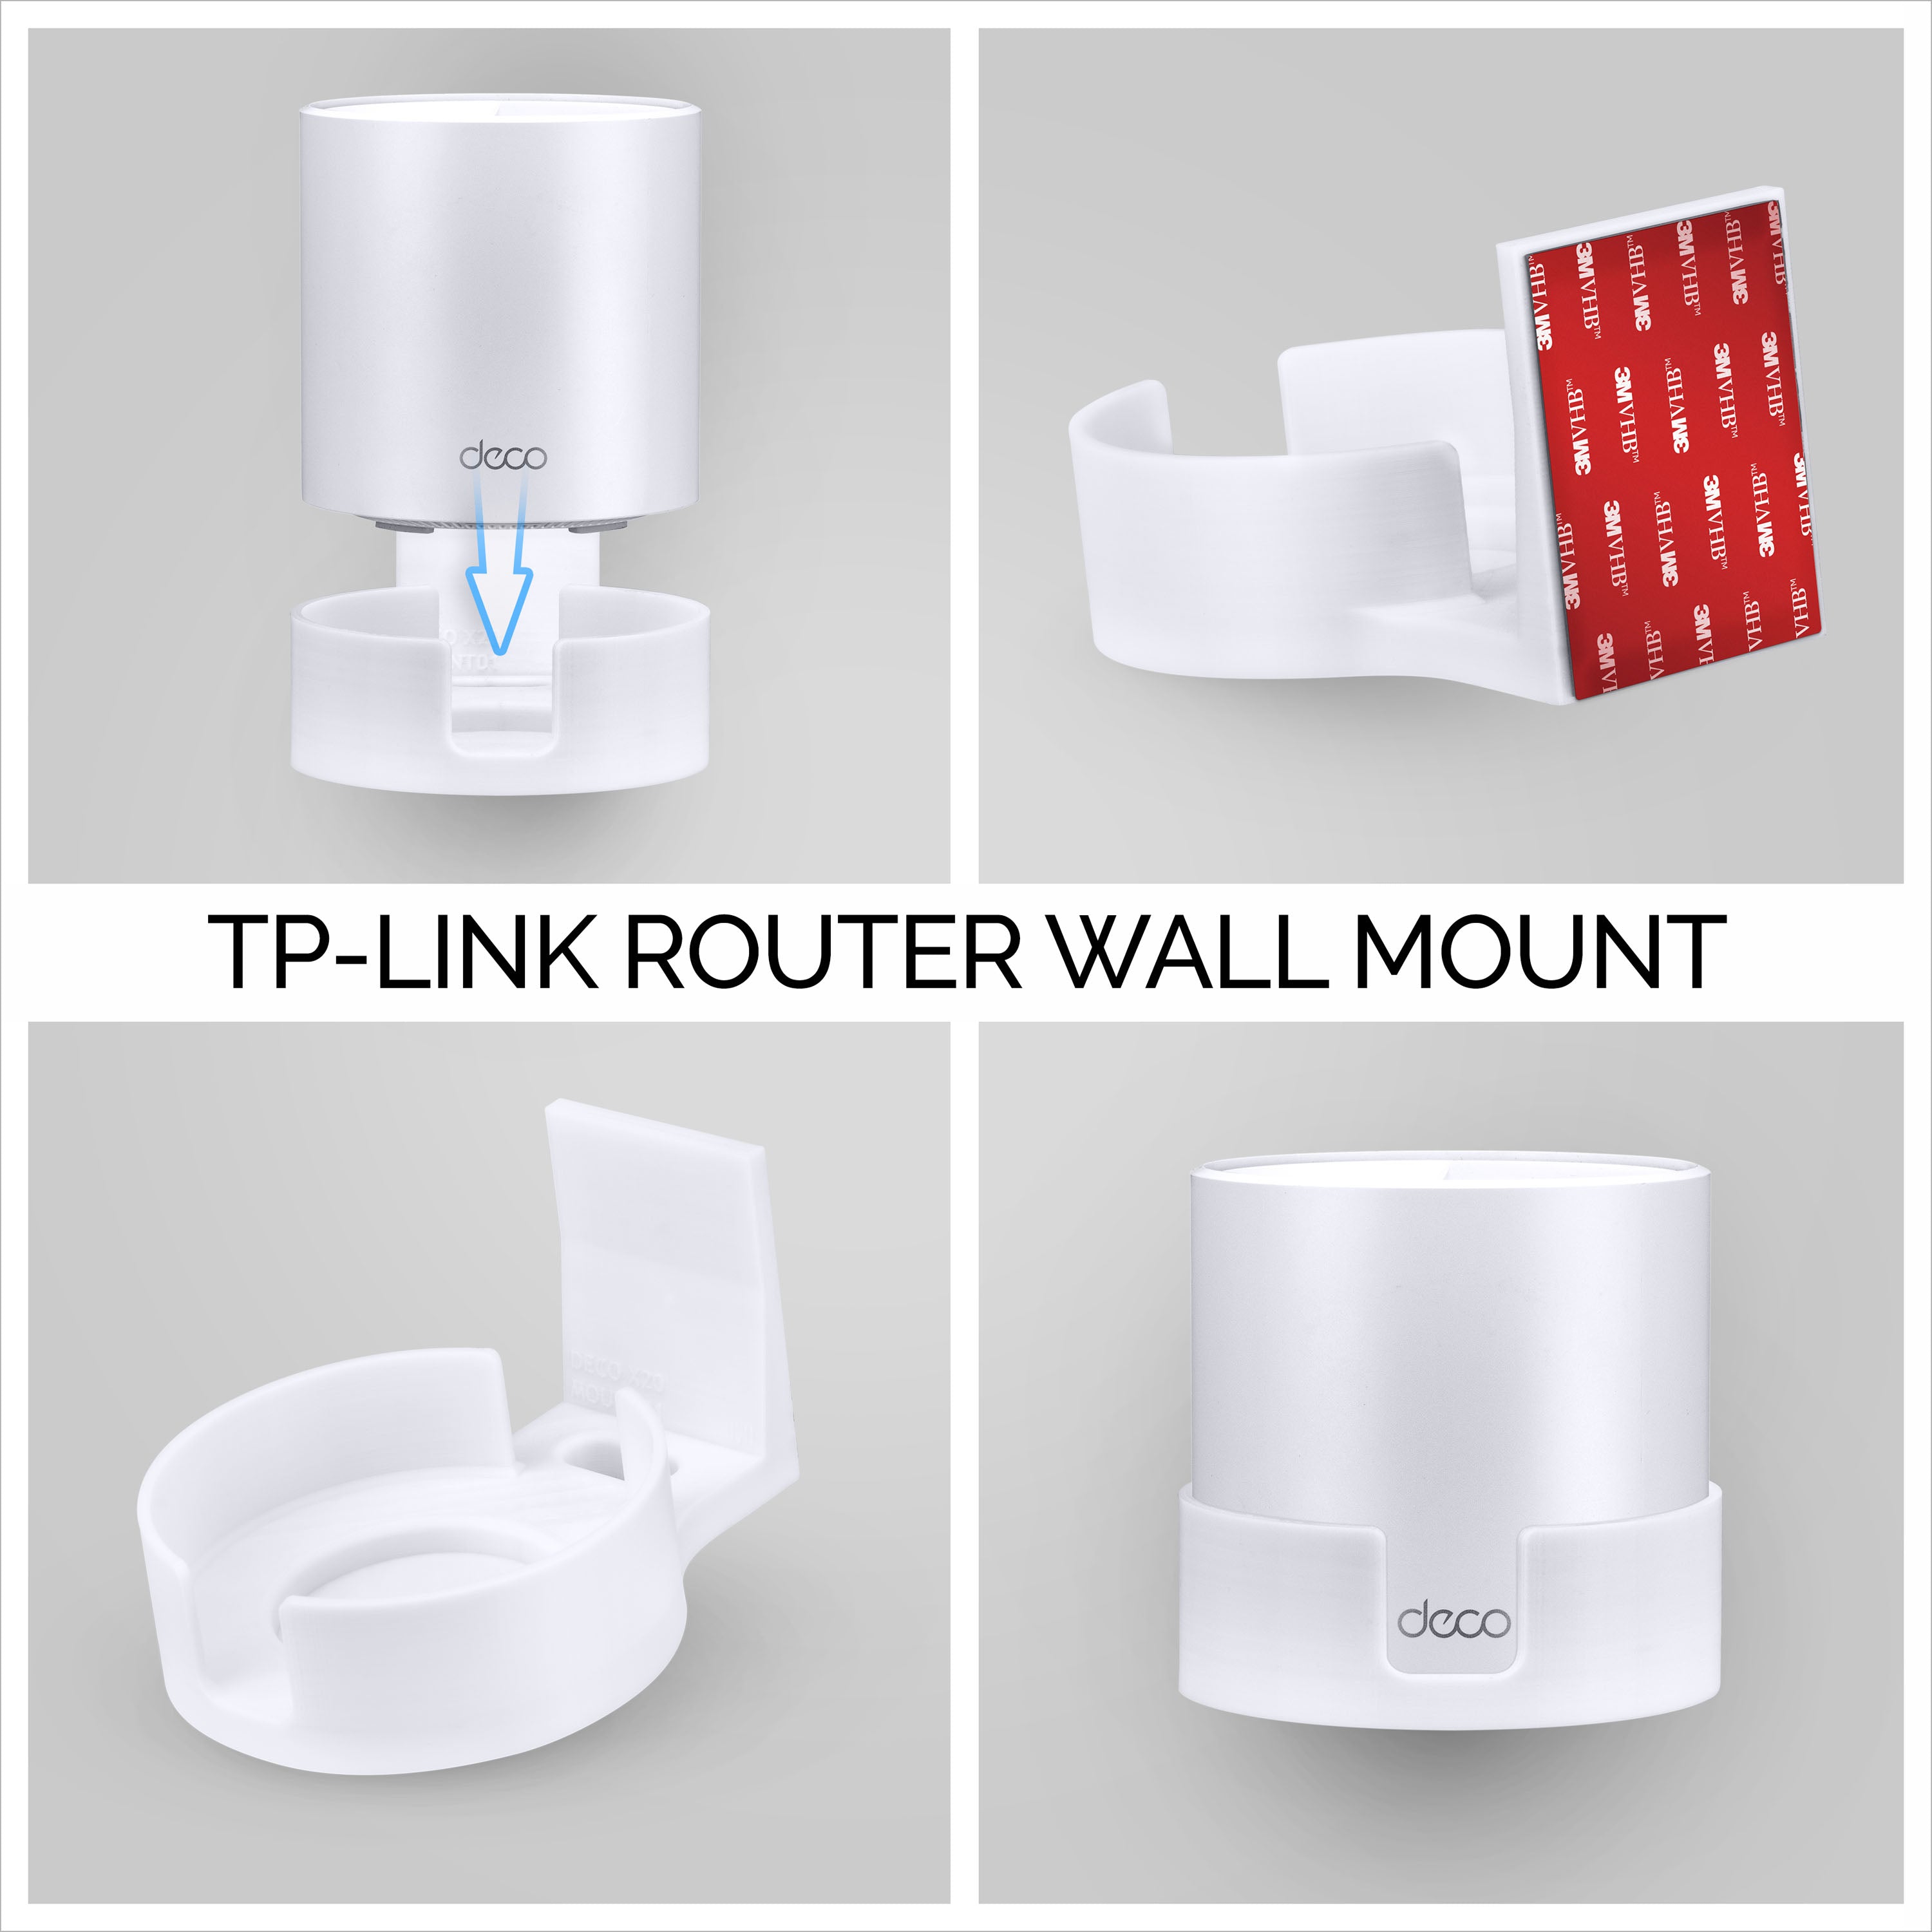 Screwless Wall Mount For TP-Link Deco XE75 Router, Strong VHB Adhesive,  Easy to Install, No Mess, Reduce Interference & Increase Range, Stick On